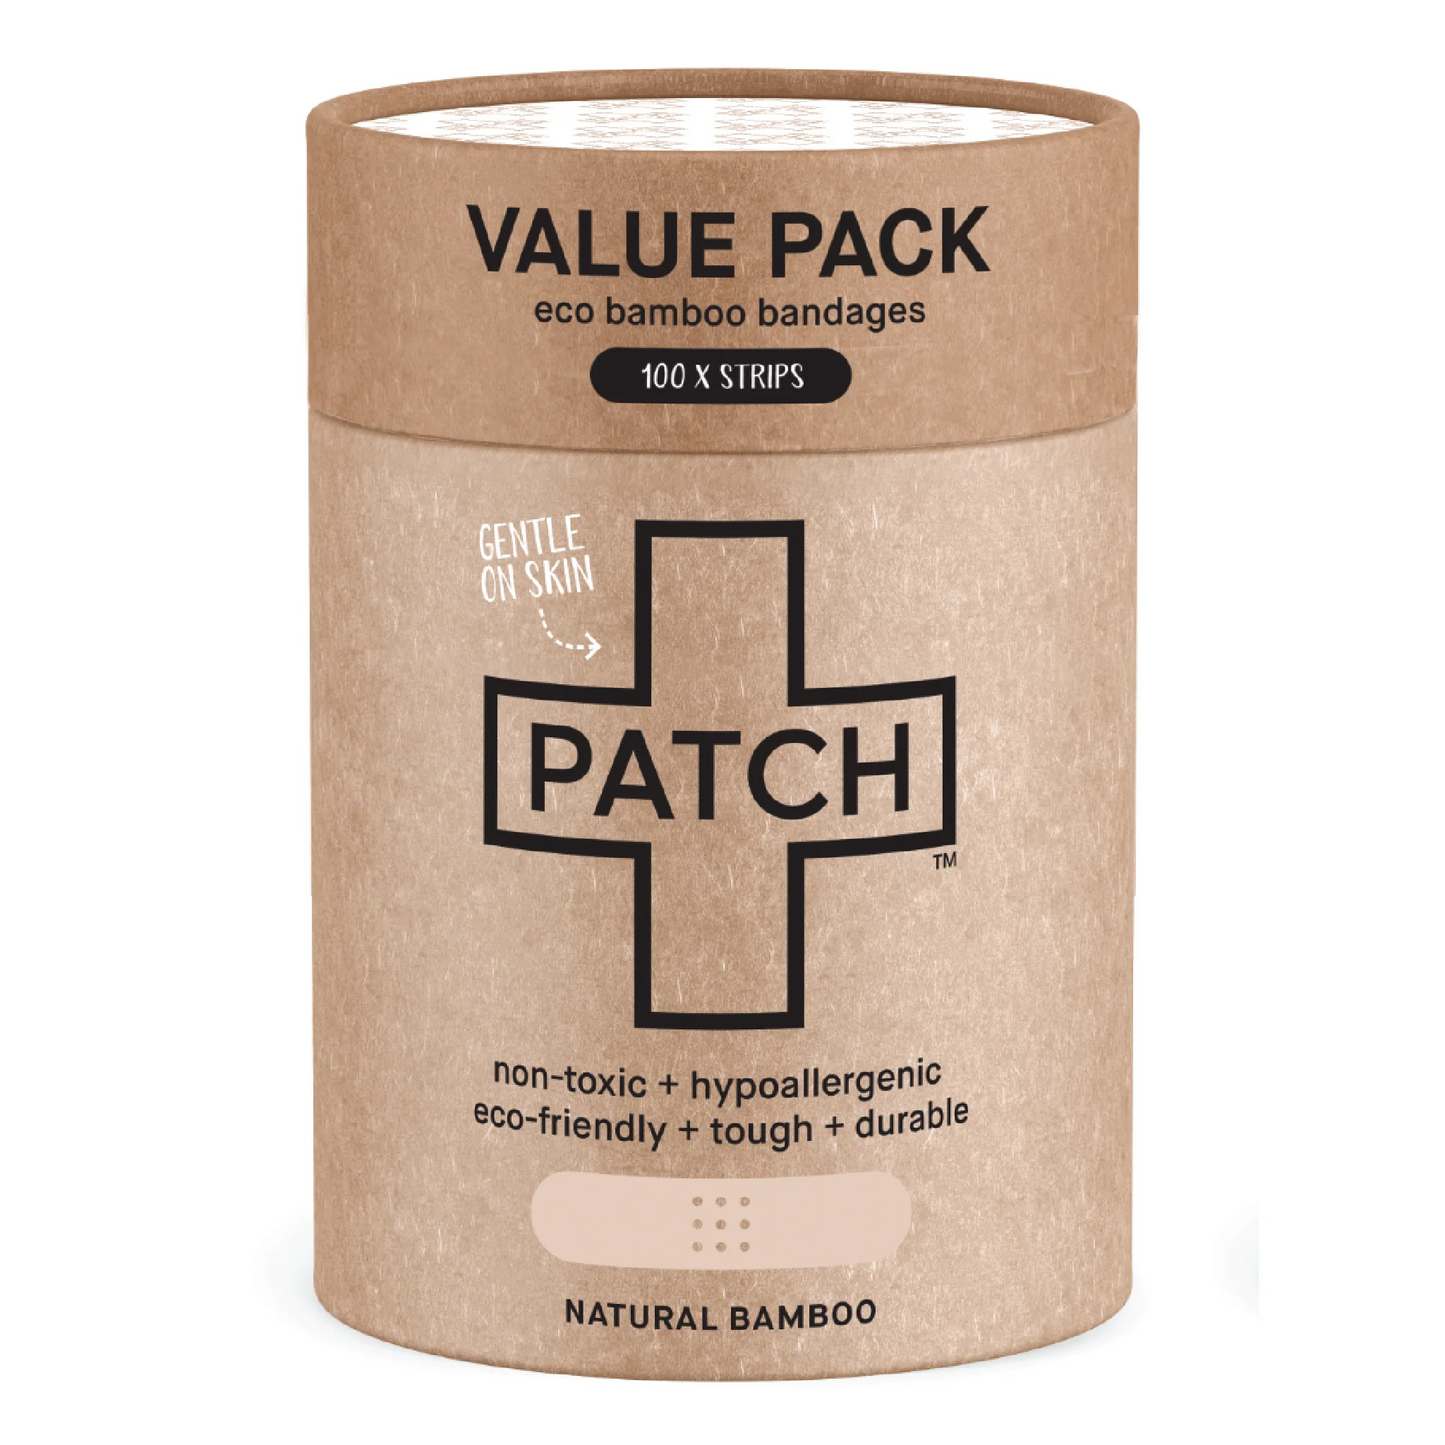 Patch - 100 Natural Bamboo Bandages Value Pack